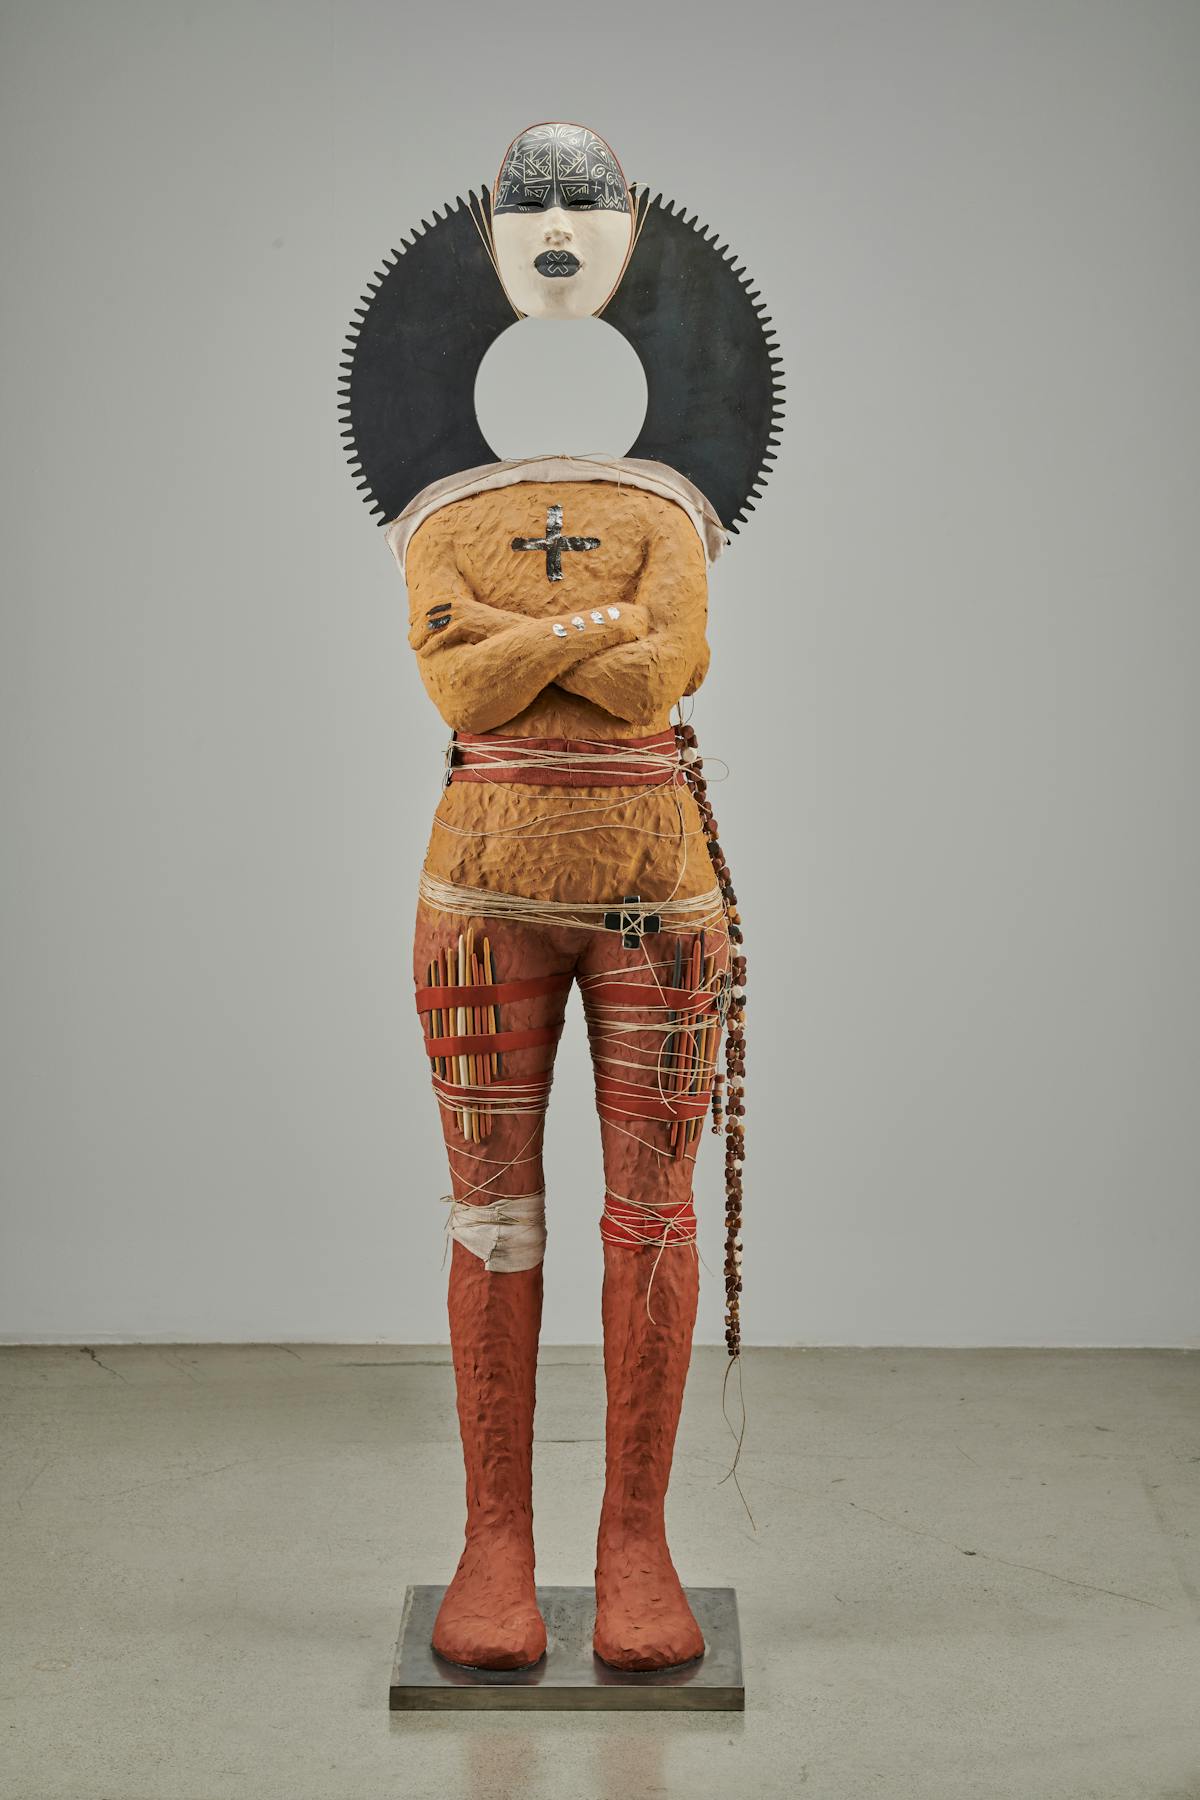 earthtone orange and red humanoid sculpture with arms folded and various accoutrements on legs and head suspended from body via a gray ring